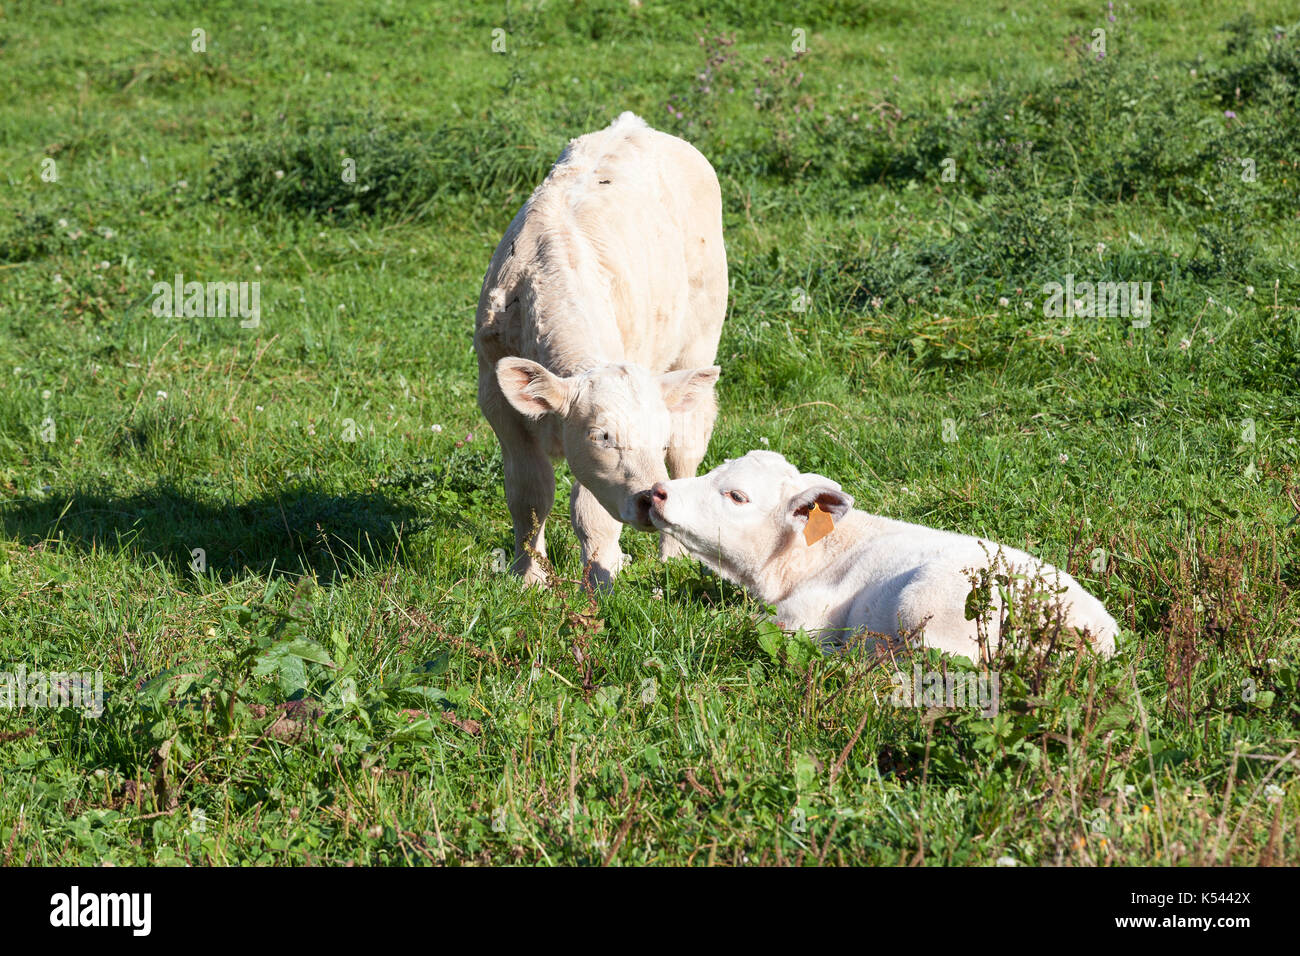 Tenderness - a young Charolais beef calf nuzzles a small white newborn  calf in a lush green spring pasture as they touch noses  in evening light Stock Photo